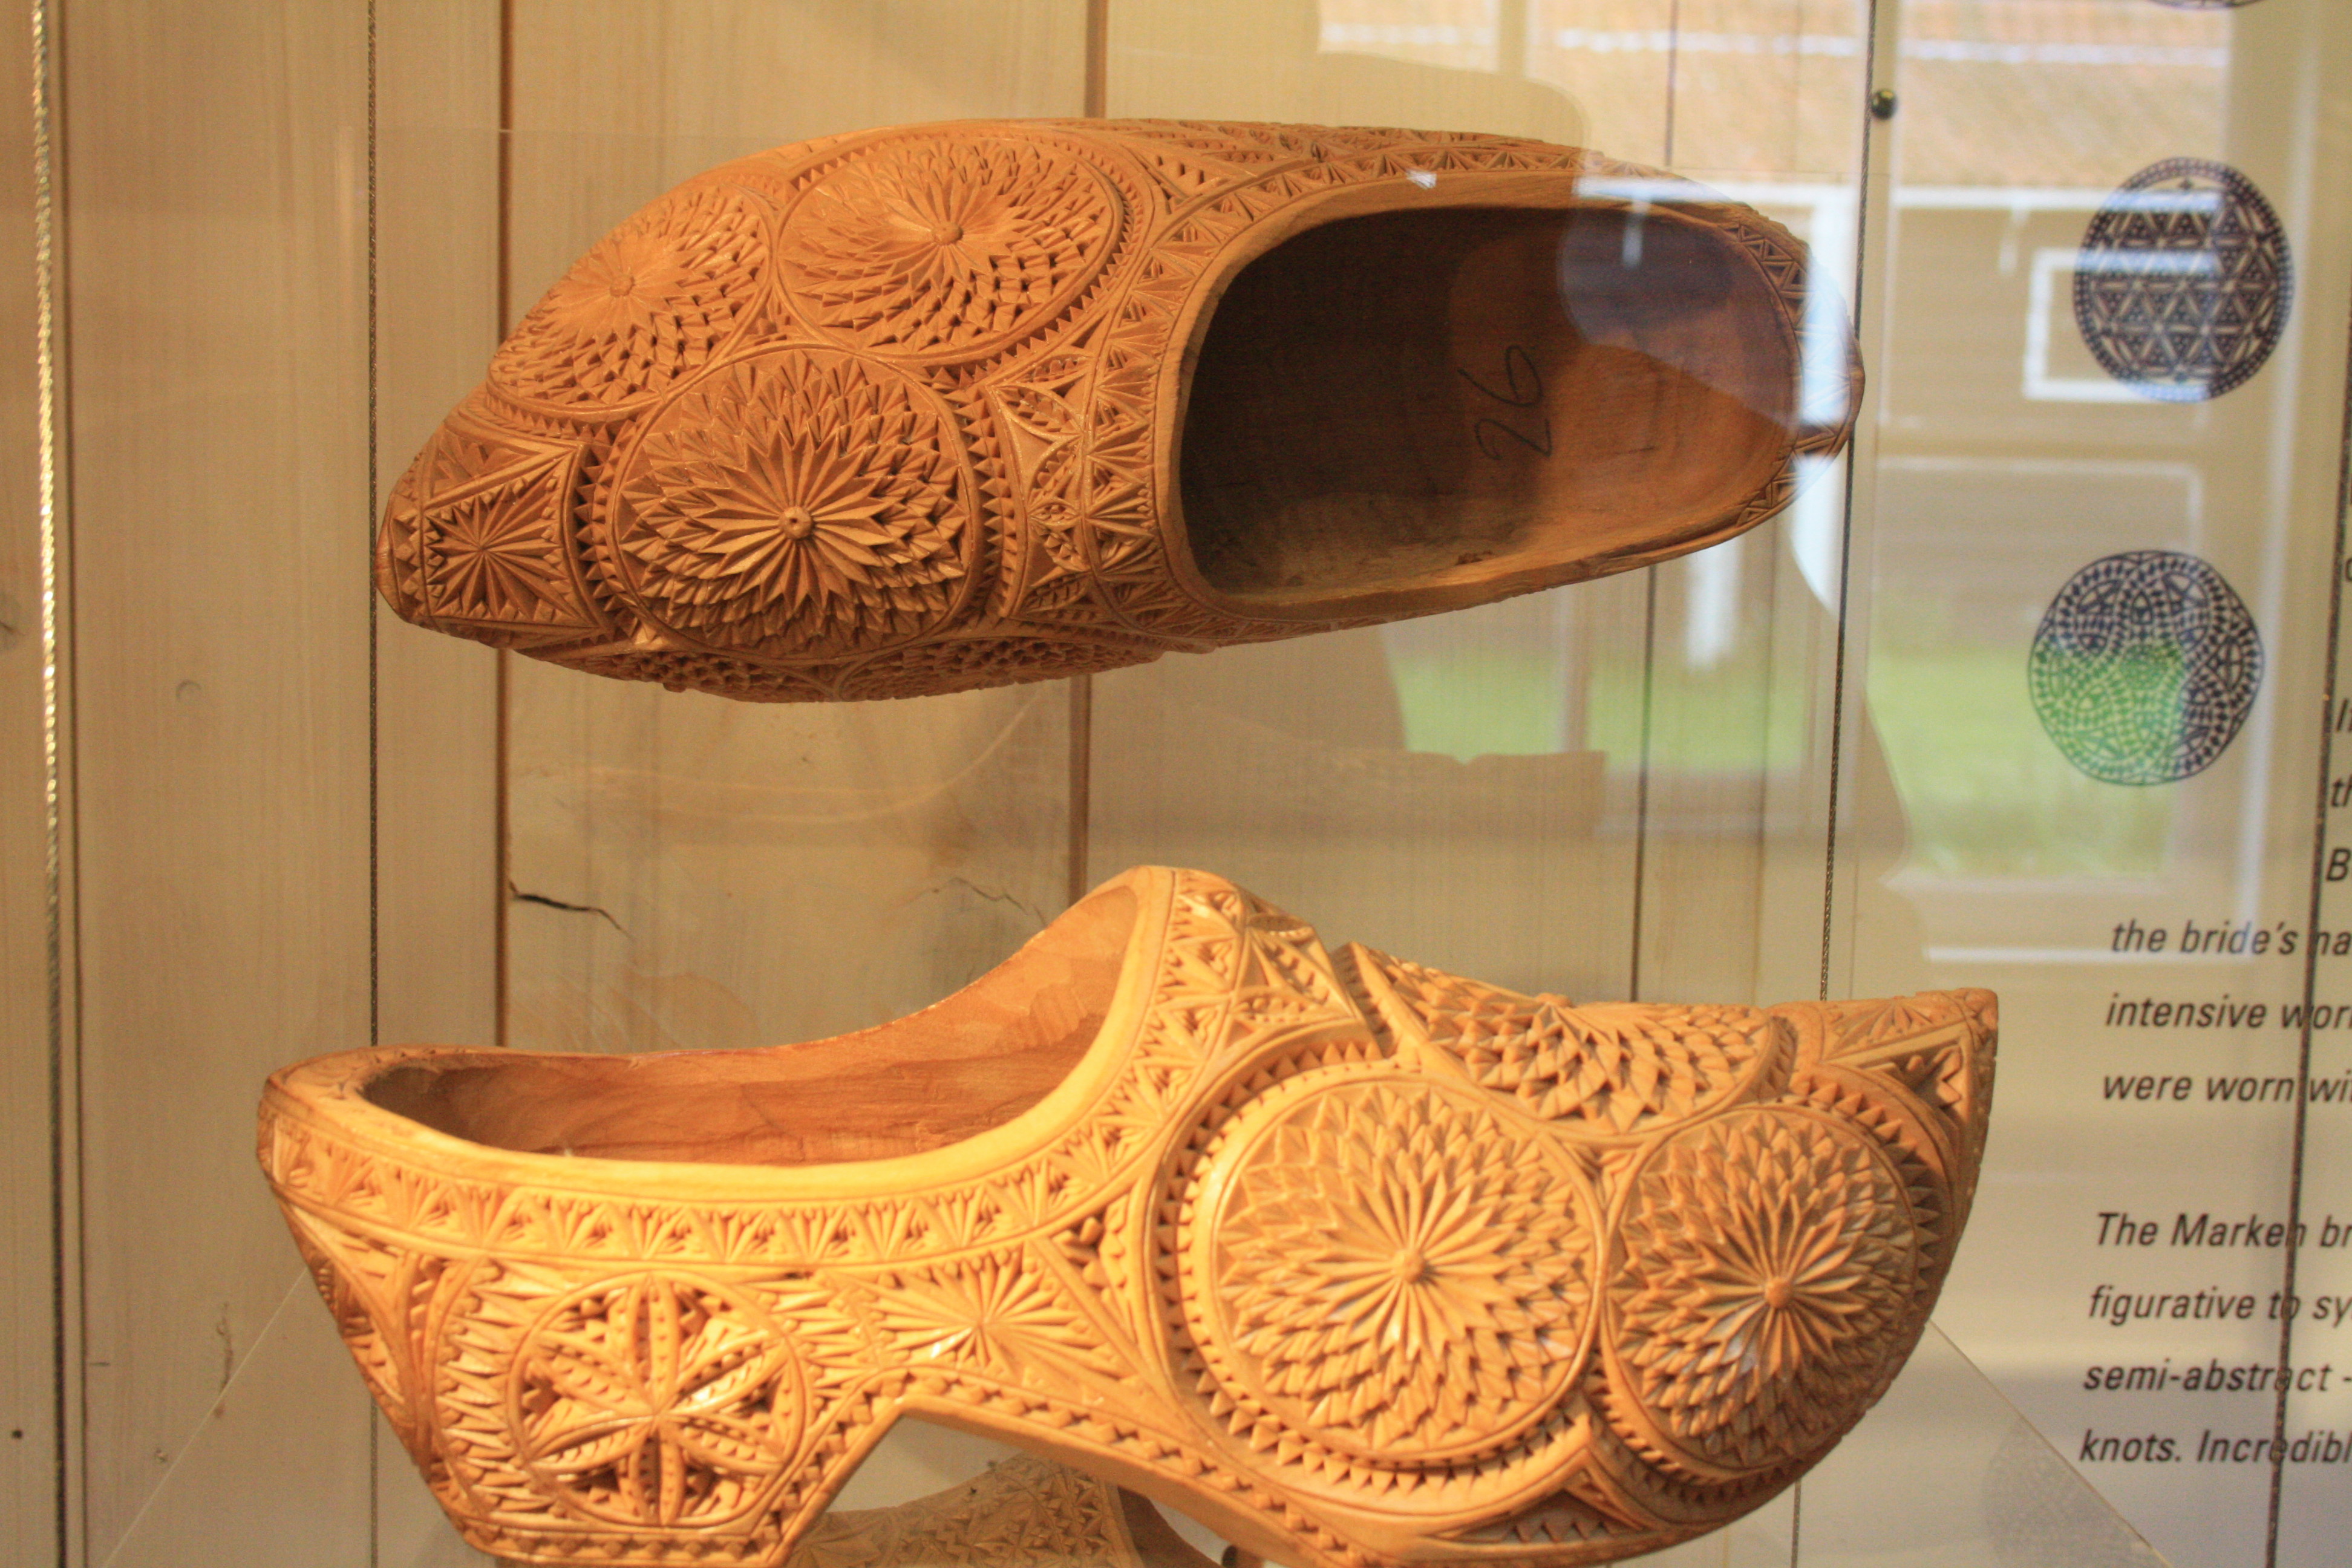 File:Wooden Shoes, Amsterdam, The Netherlands.jpg - Wikimedia Commons